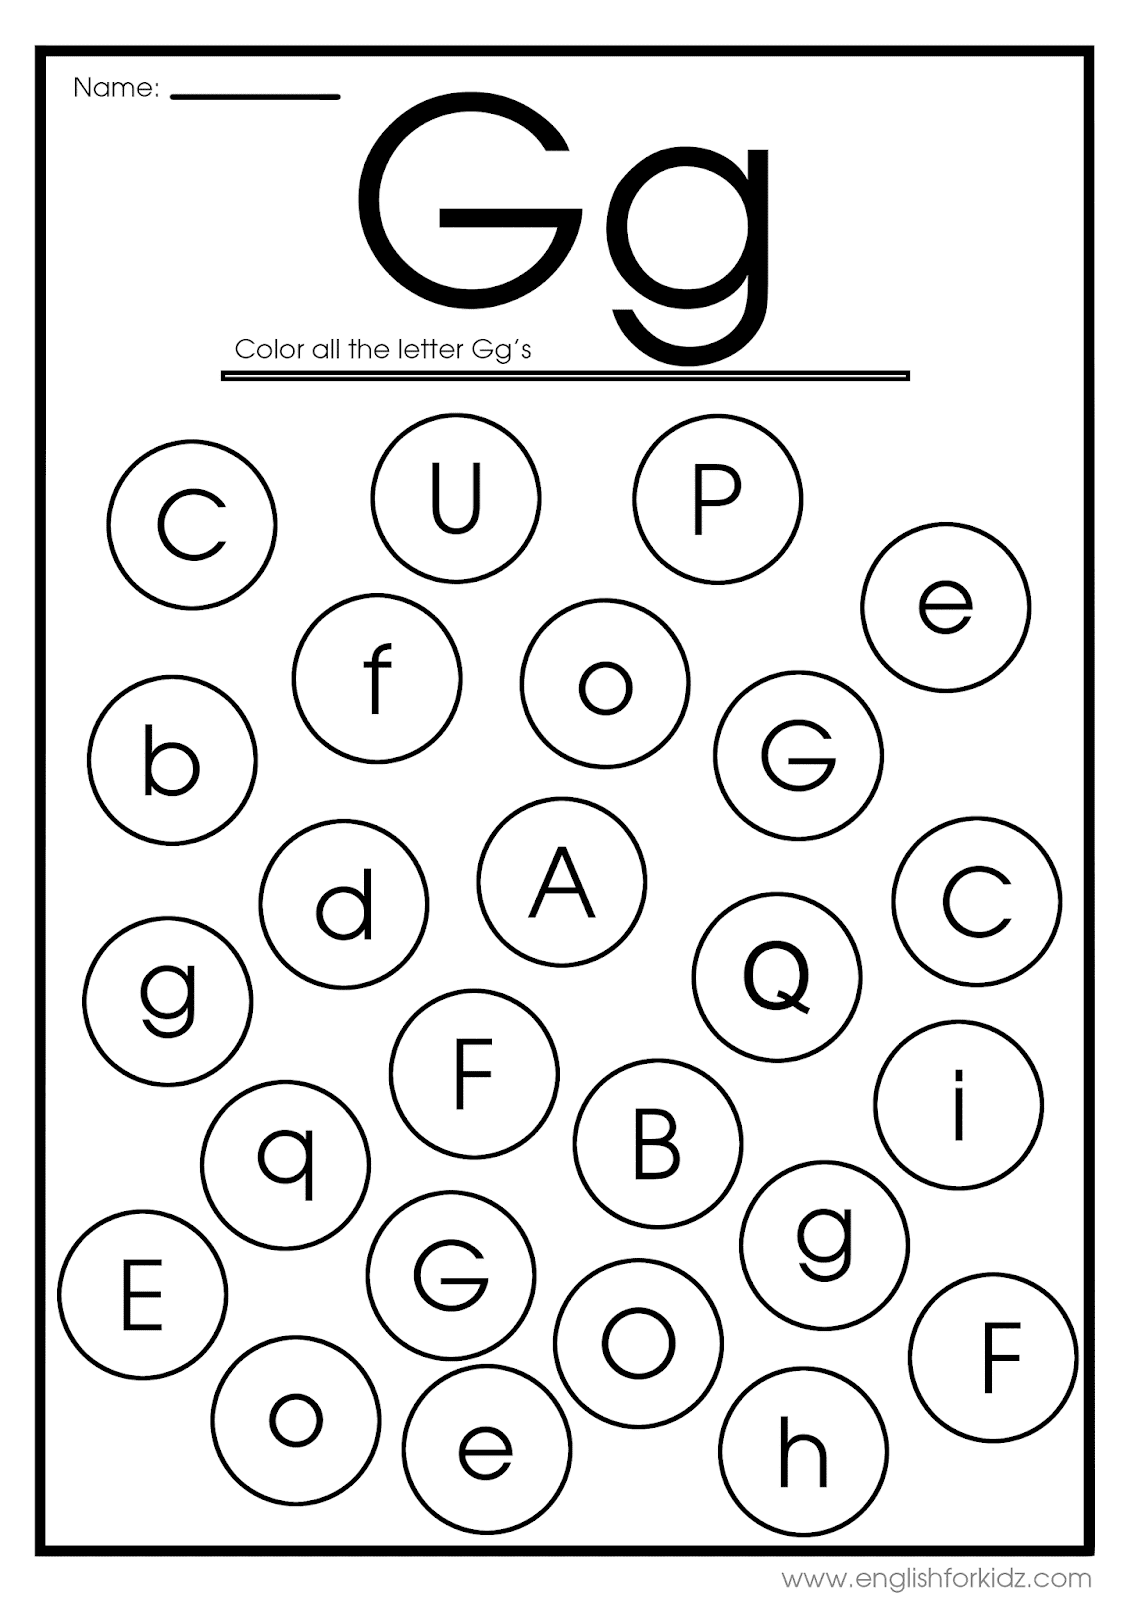 English for Kids Step by Step Letter G Worksheets, Flash Cards